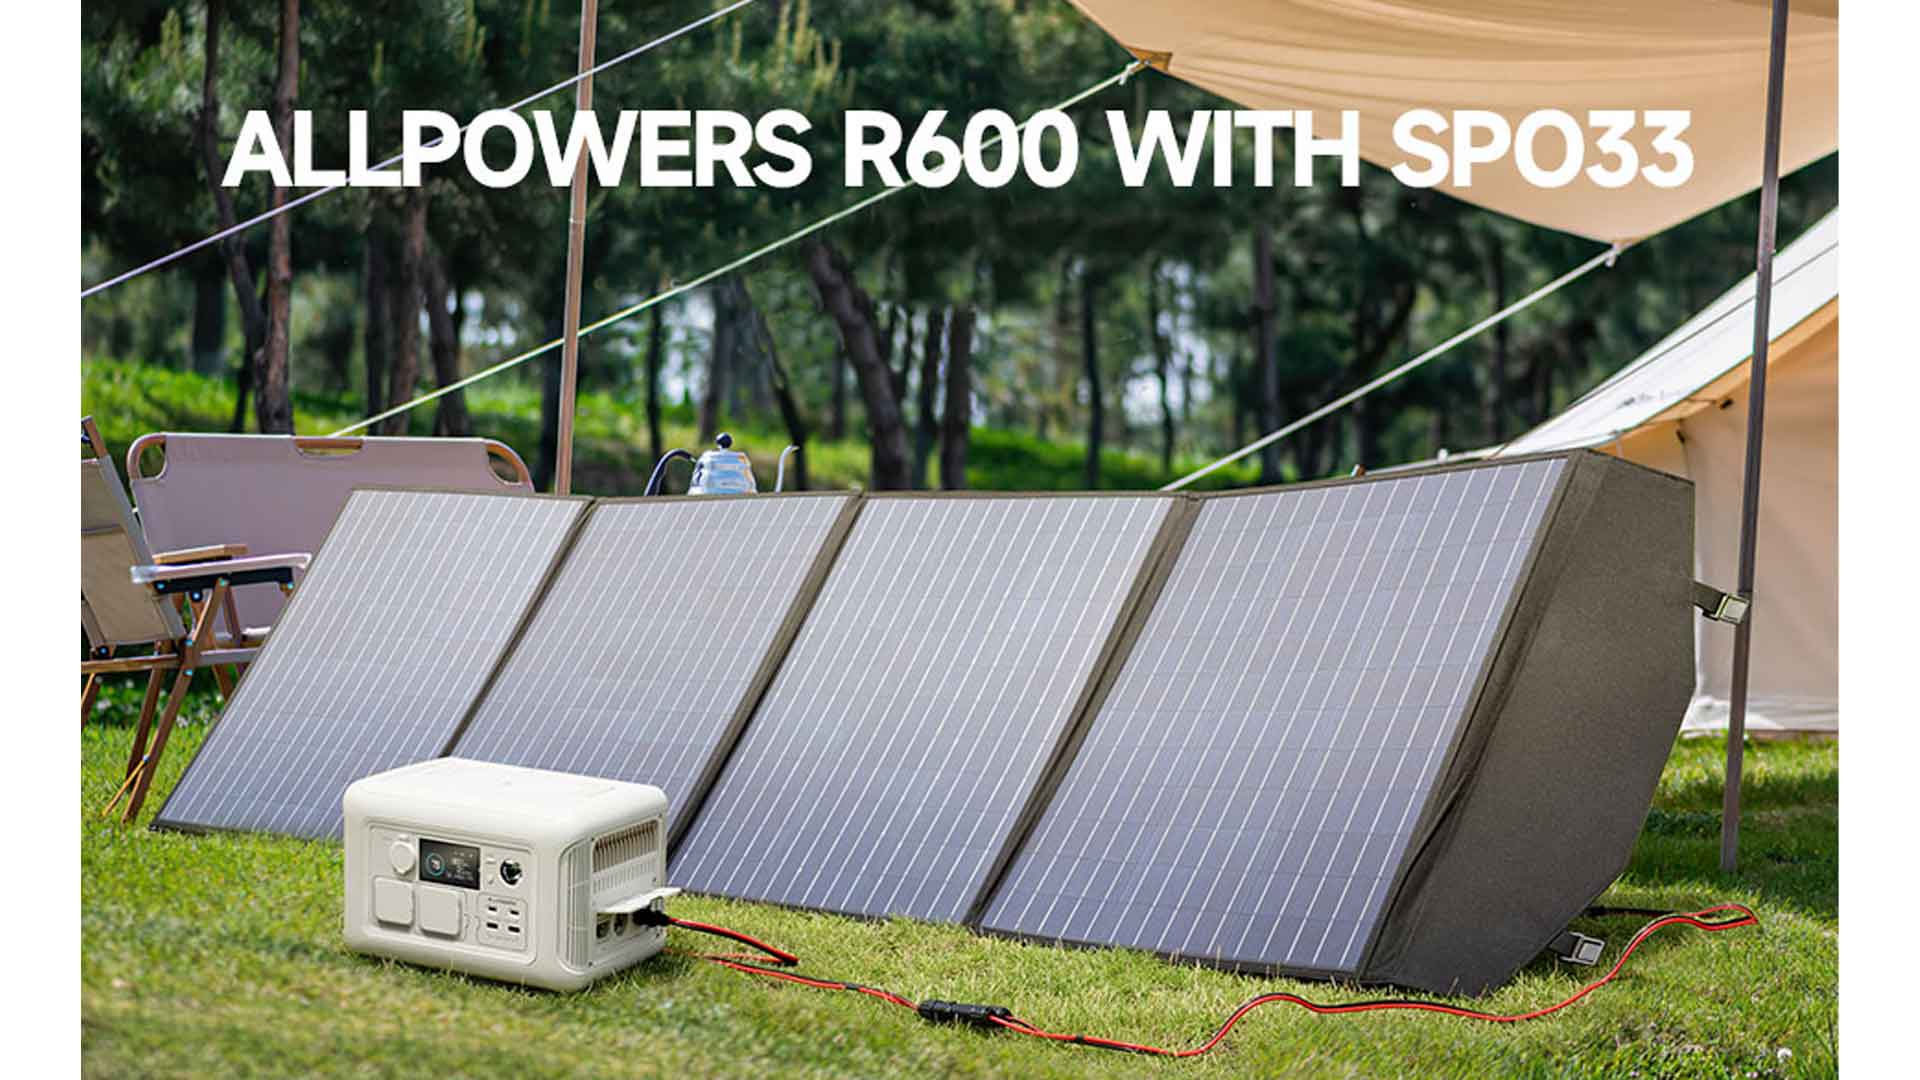 portable power station, ALLPOWERS R600 Solar Generator, $100 coupon, 600W Huge Stable Output, 299Wh LFP Battery, Start UPS in 10 ms, SP033 200W foldable solar panel